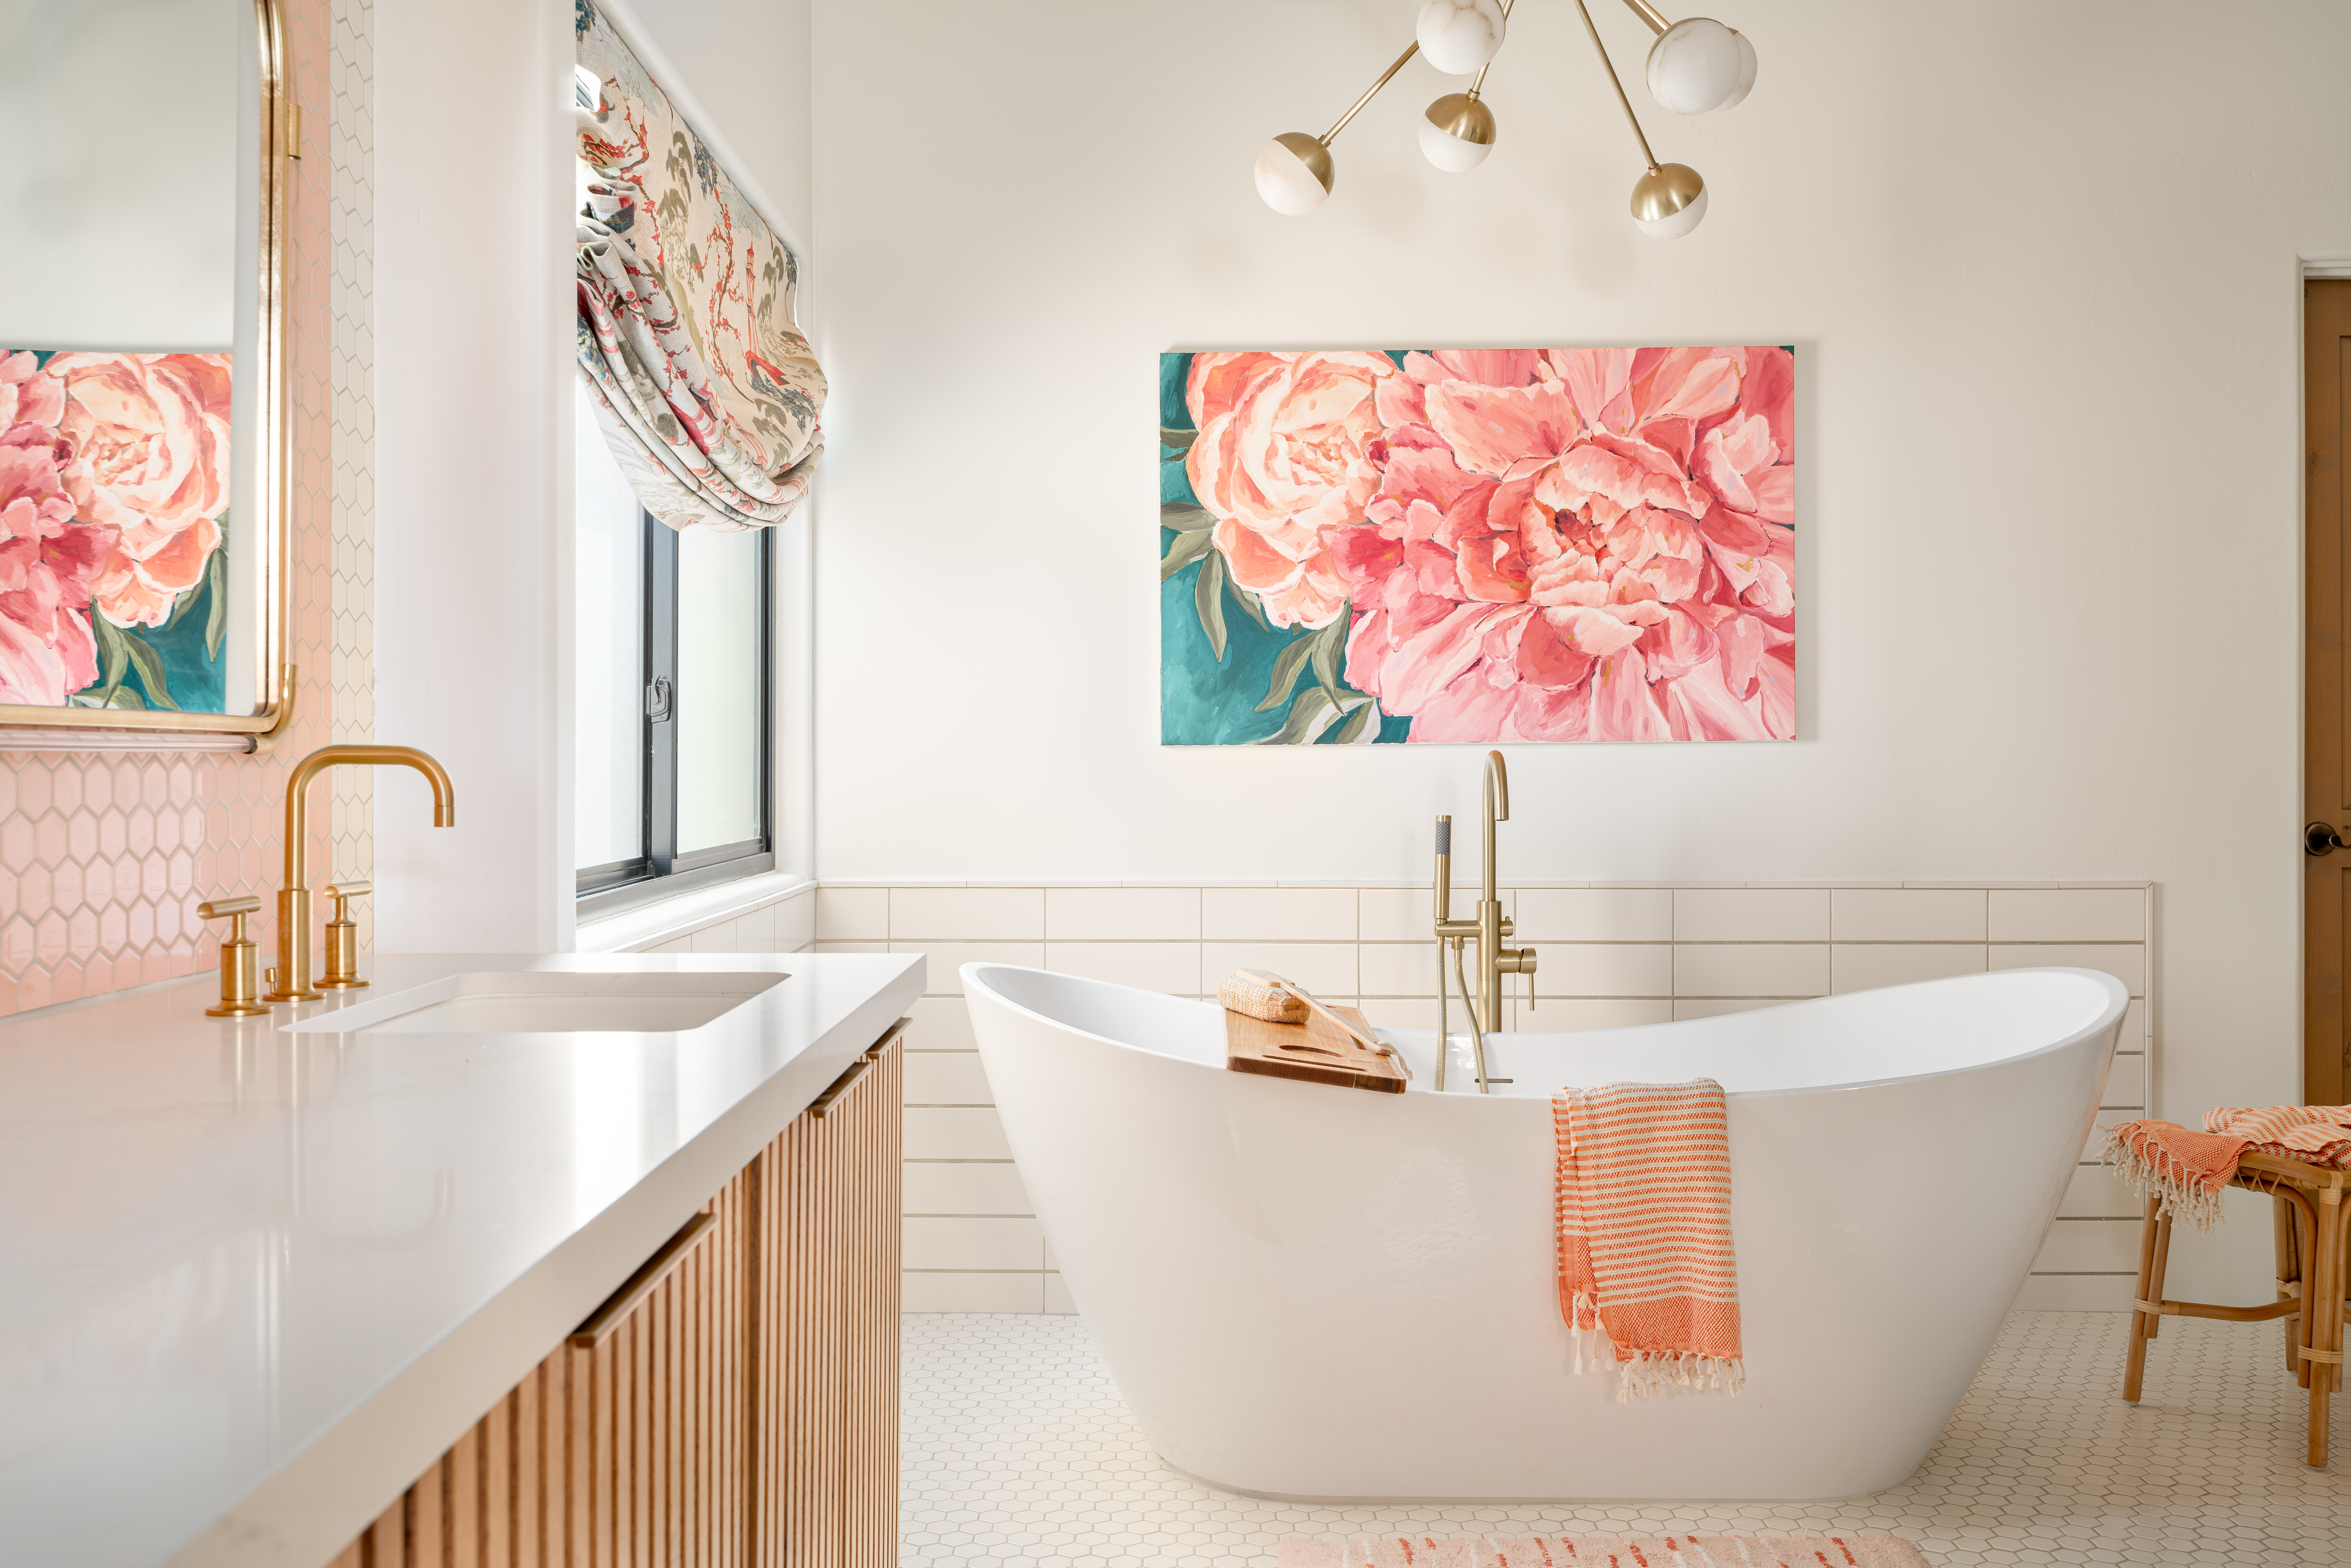 Art deco bathroom with white subway tile and large floral painting